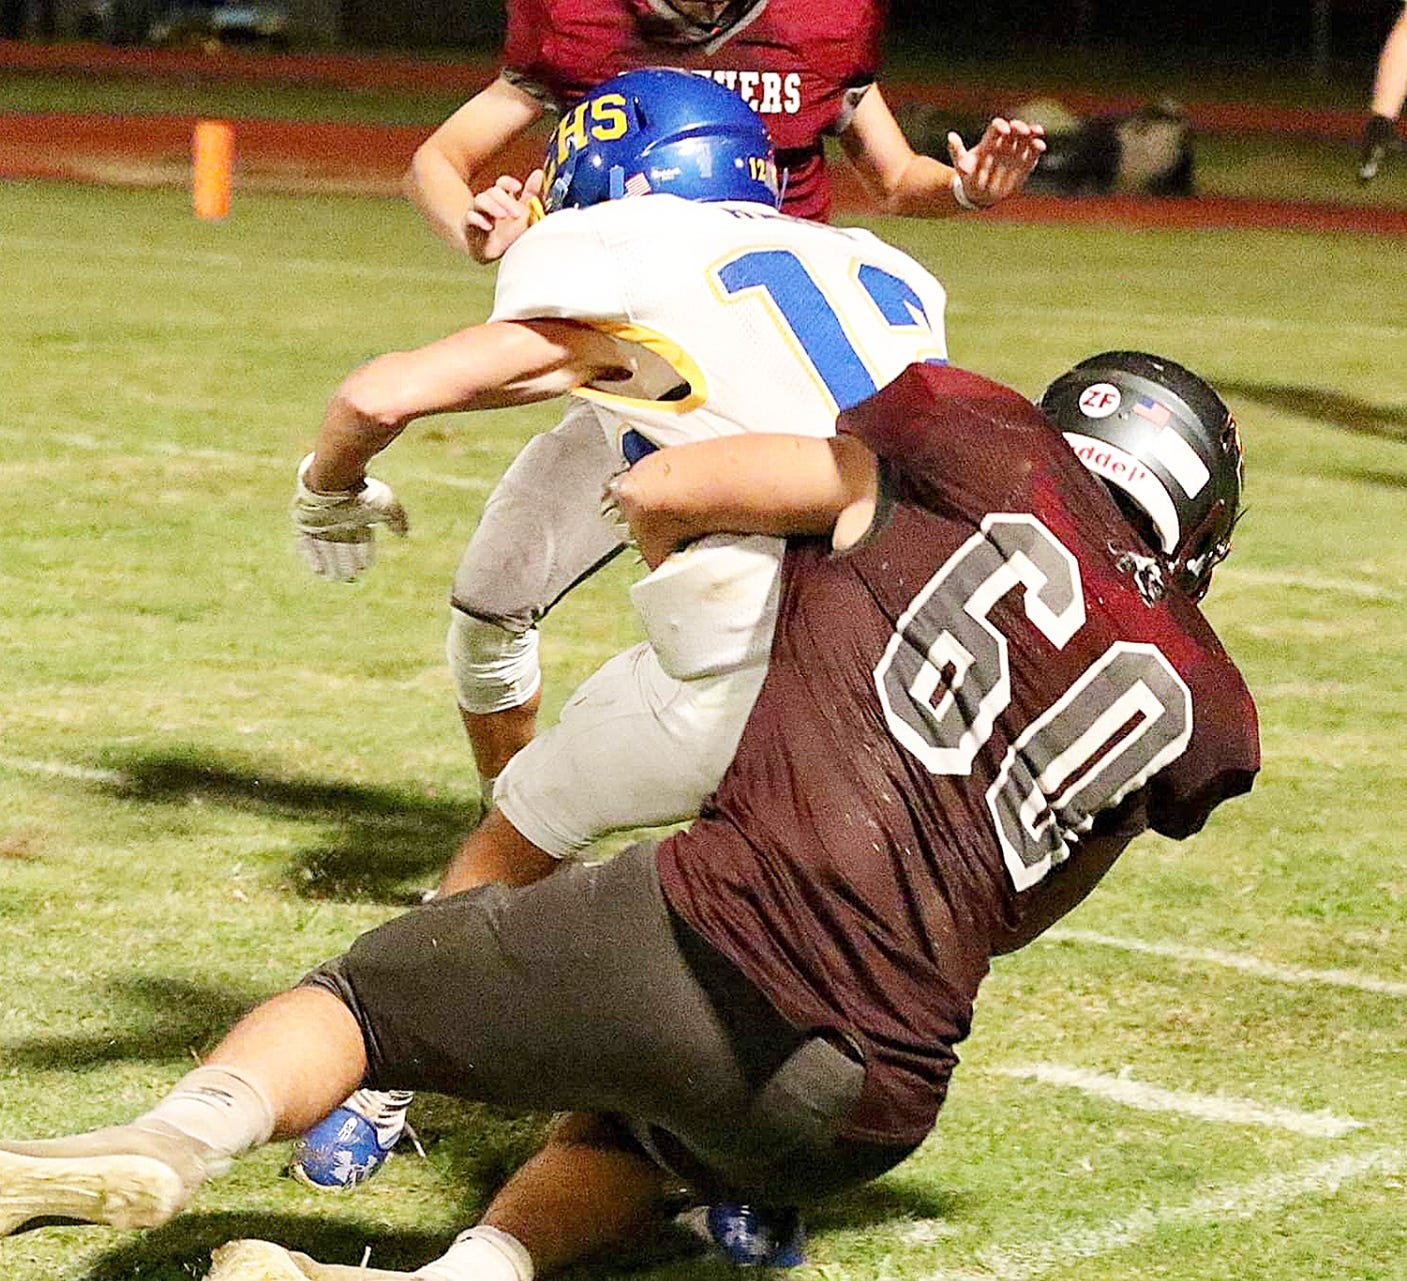 Merryville's Tyler Belcher (60) brings down a runner during a recent Panther loss. Belcher and the Panthers found themselves on the wrong end of the scoreboard on Thursday, falling to Grand Lake, 34-0.